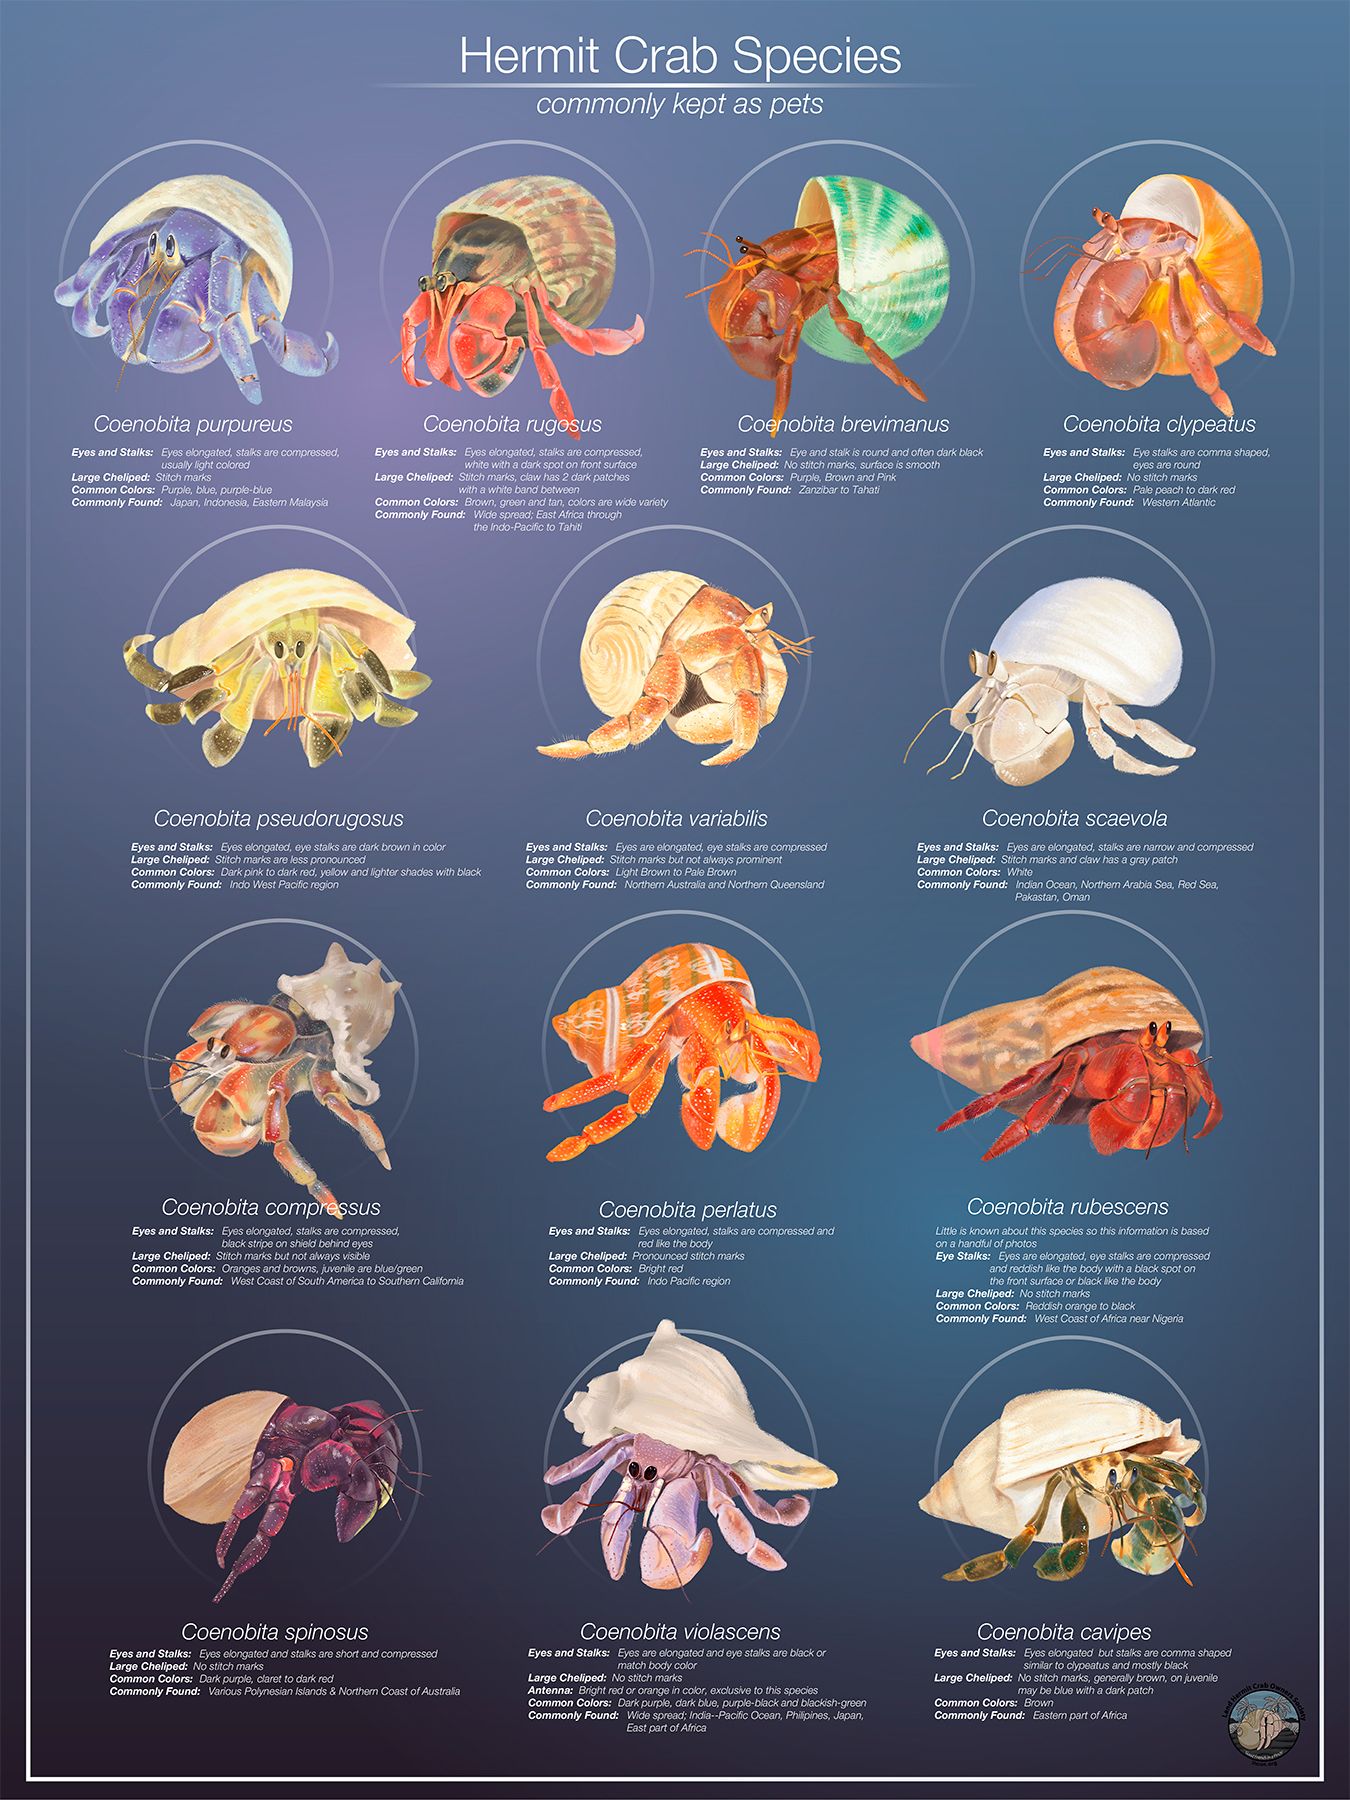 How many different types of hermit crabs are there?